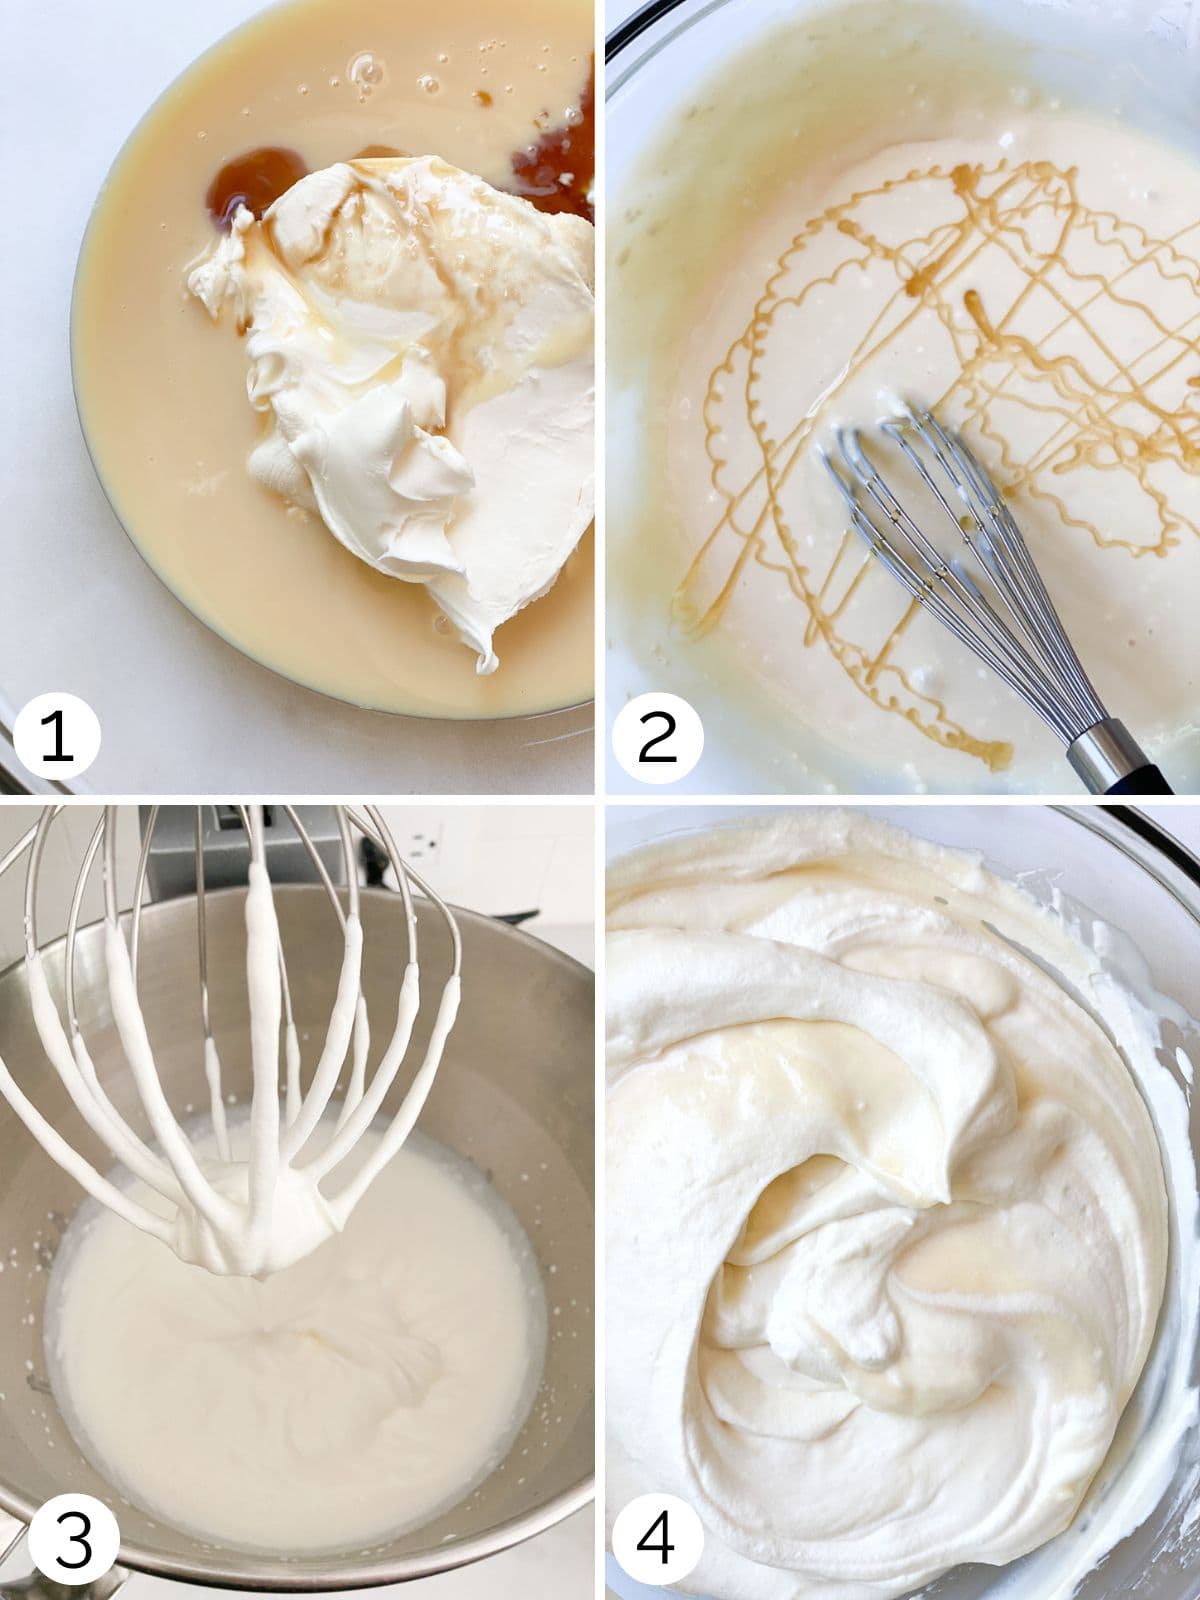 Step by step process for making no churn ice cream.